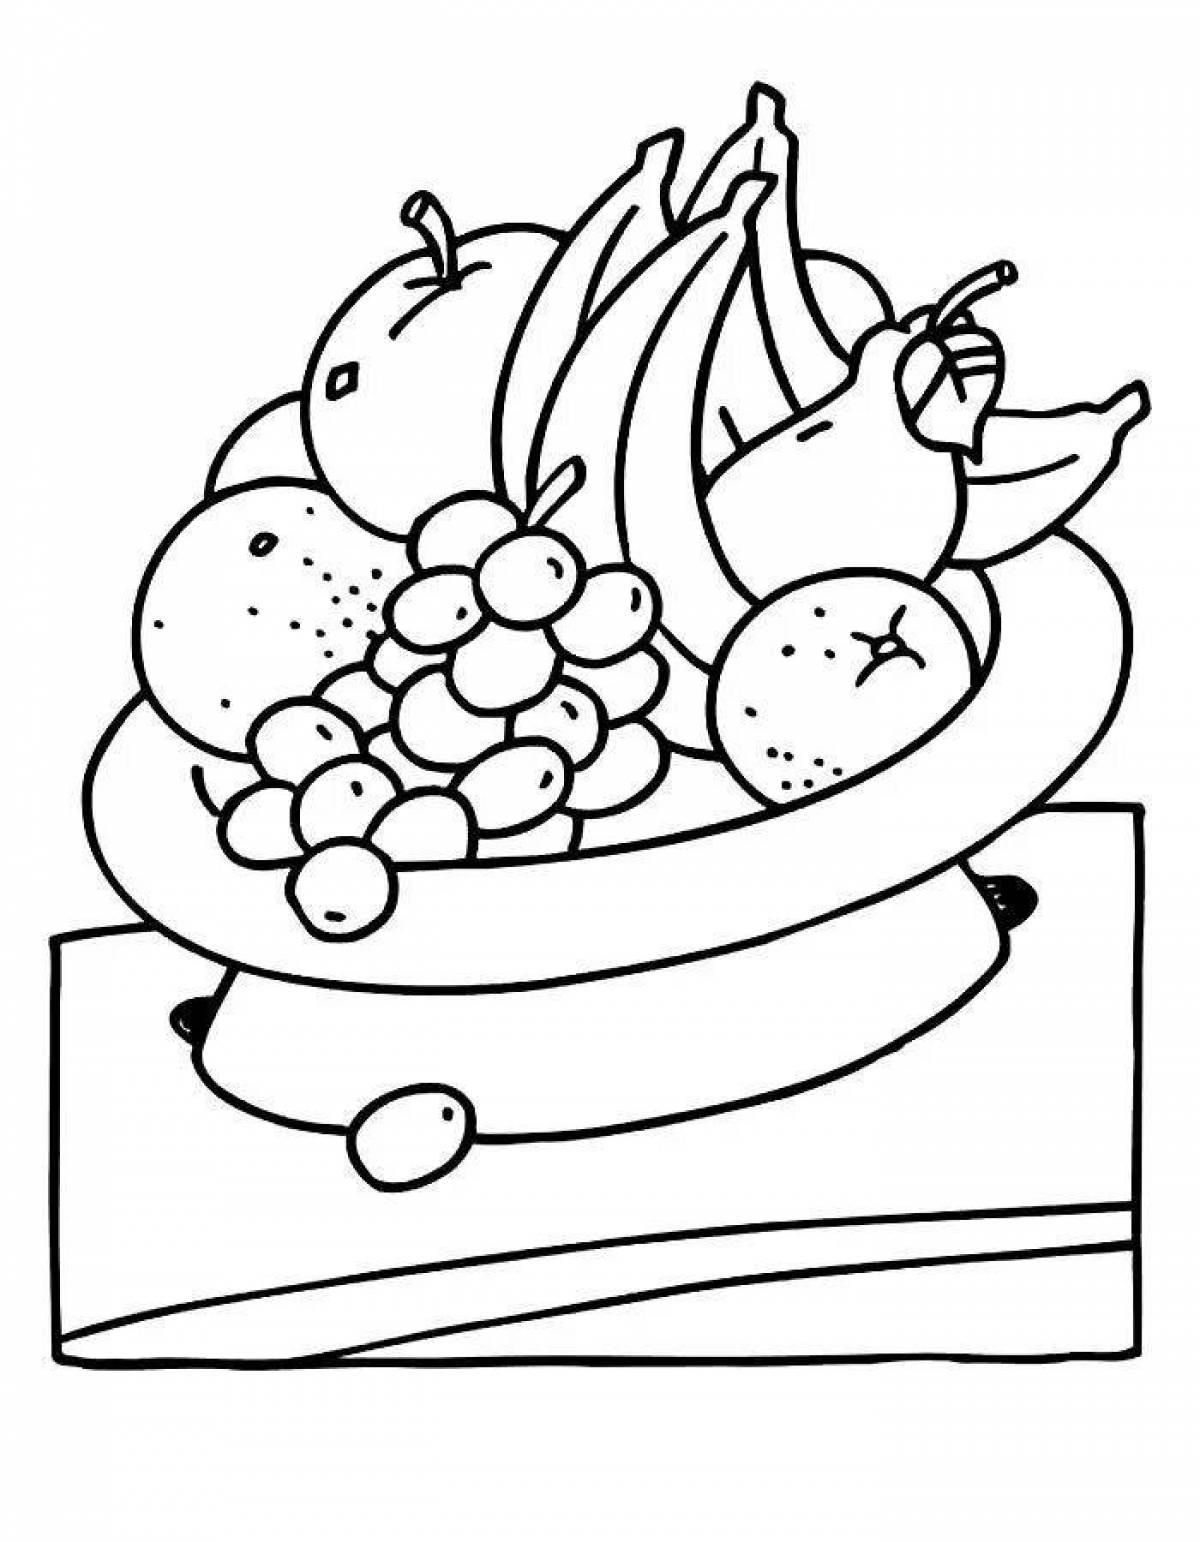 Attractive still life of vegetables and fruits for preschoolers